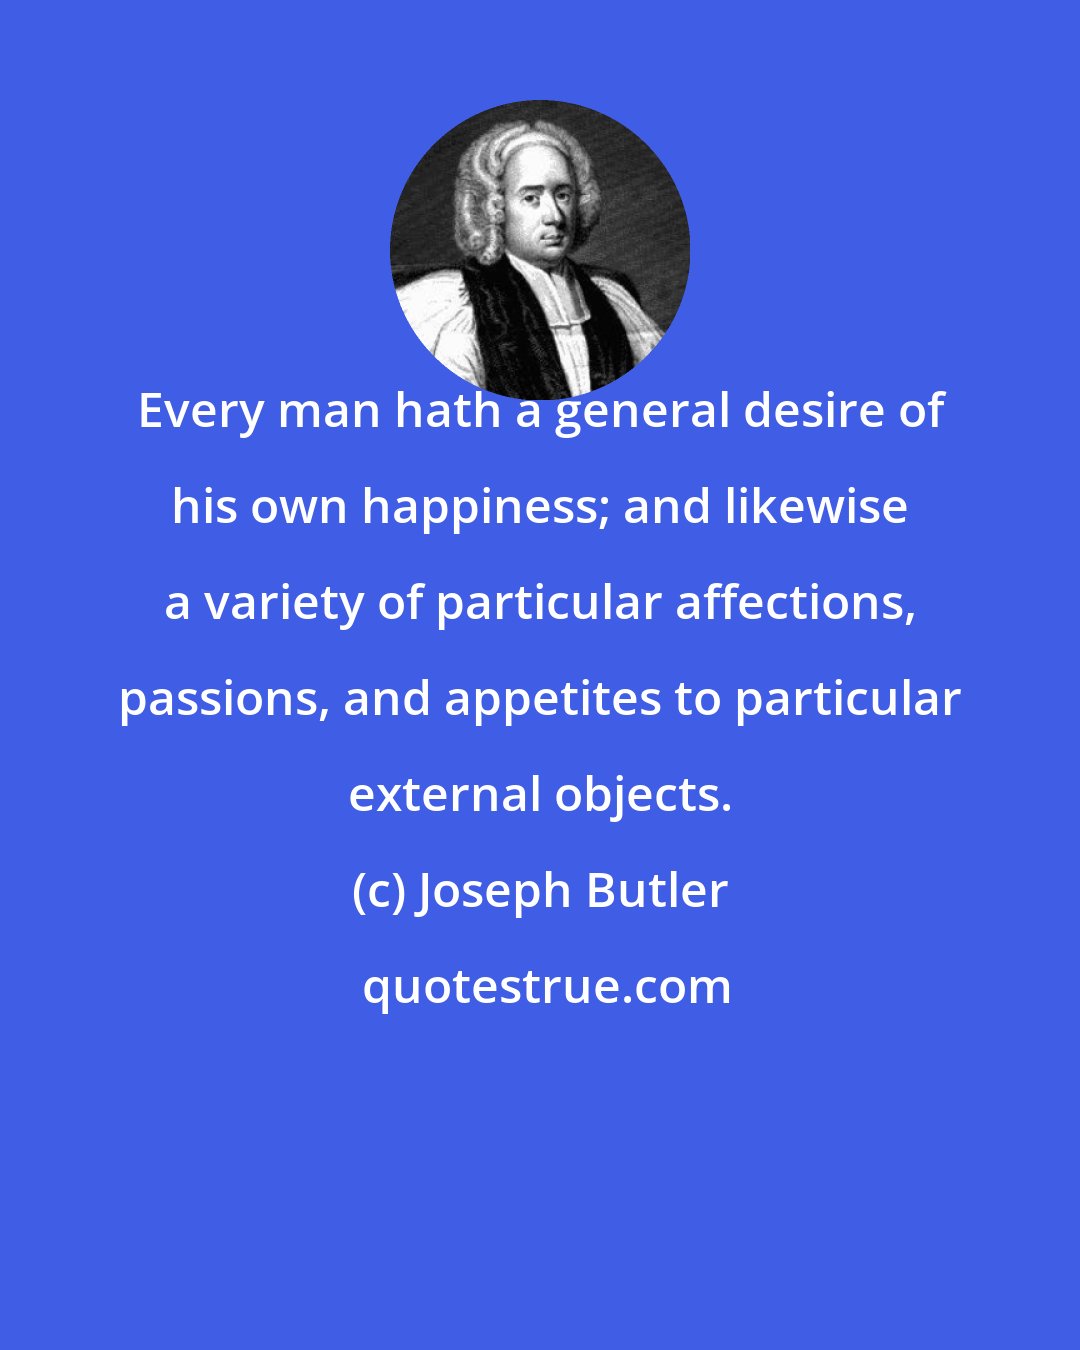 Joseph Butler: Every man hath a general desire of his own happiness; and likewise a variety of particular affections, passions, and appetites to particular external objects.